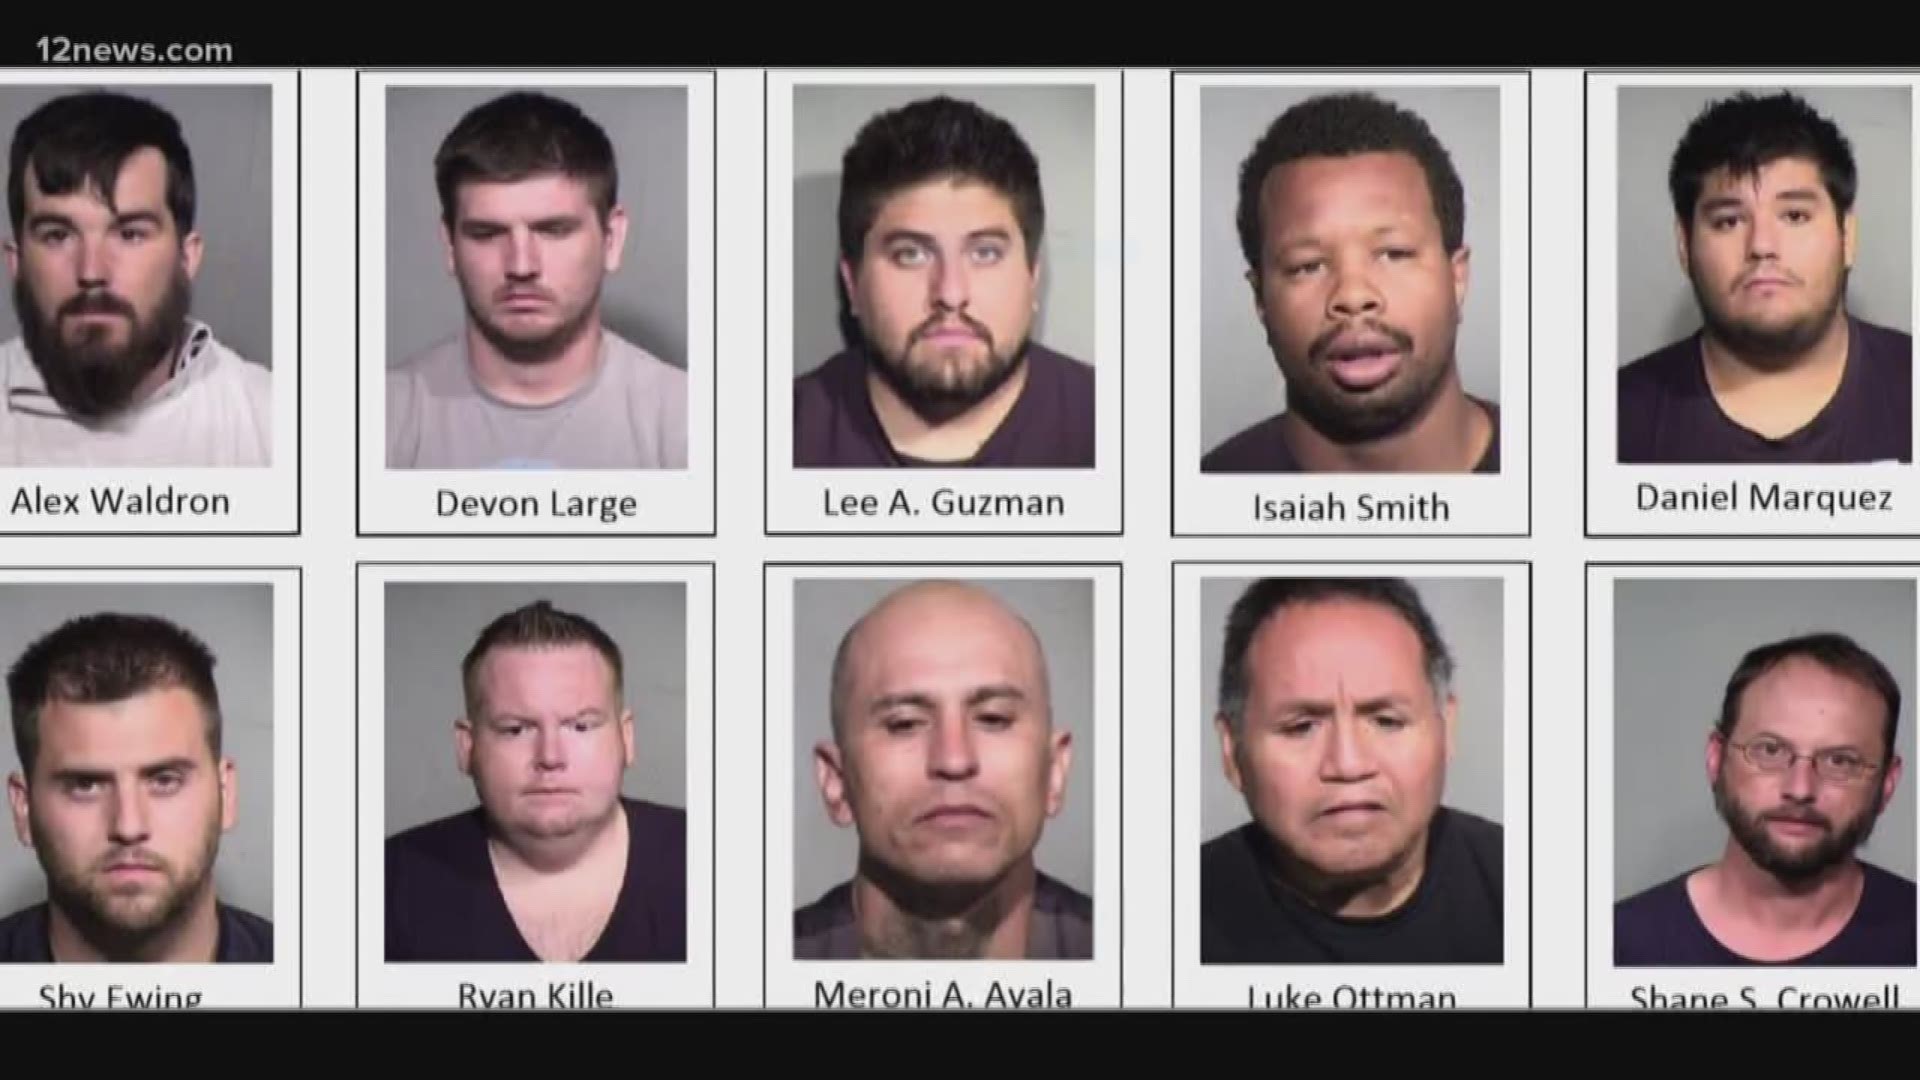 25 men have been arrested as part of a joint sting operation aimed at catching child predators called "Operation Summer Shield". Tempe and Mesa Police, along with Homeland Security investigators and the Attorney General's office, grabbed suspects accused of seeking out sex with children. The suspects were using social media sites like Facebook, Instagram and SnapChat.